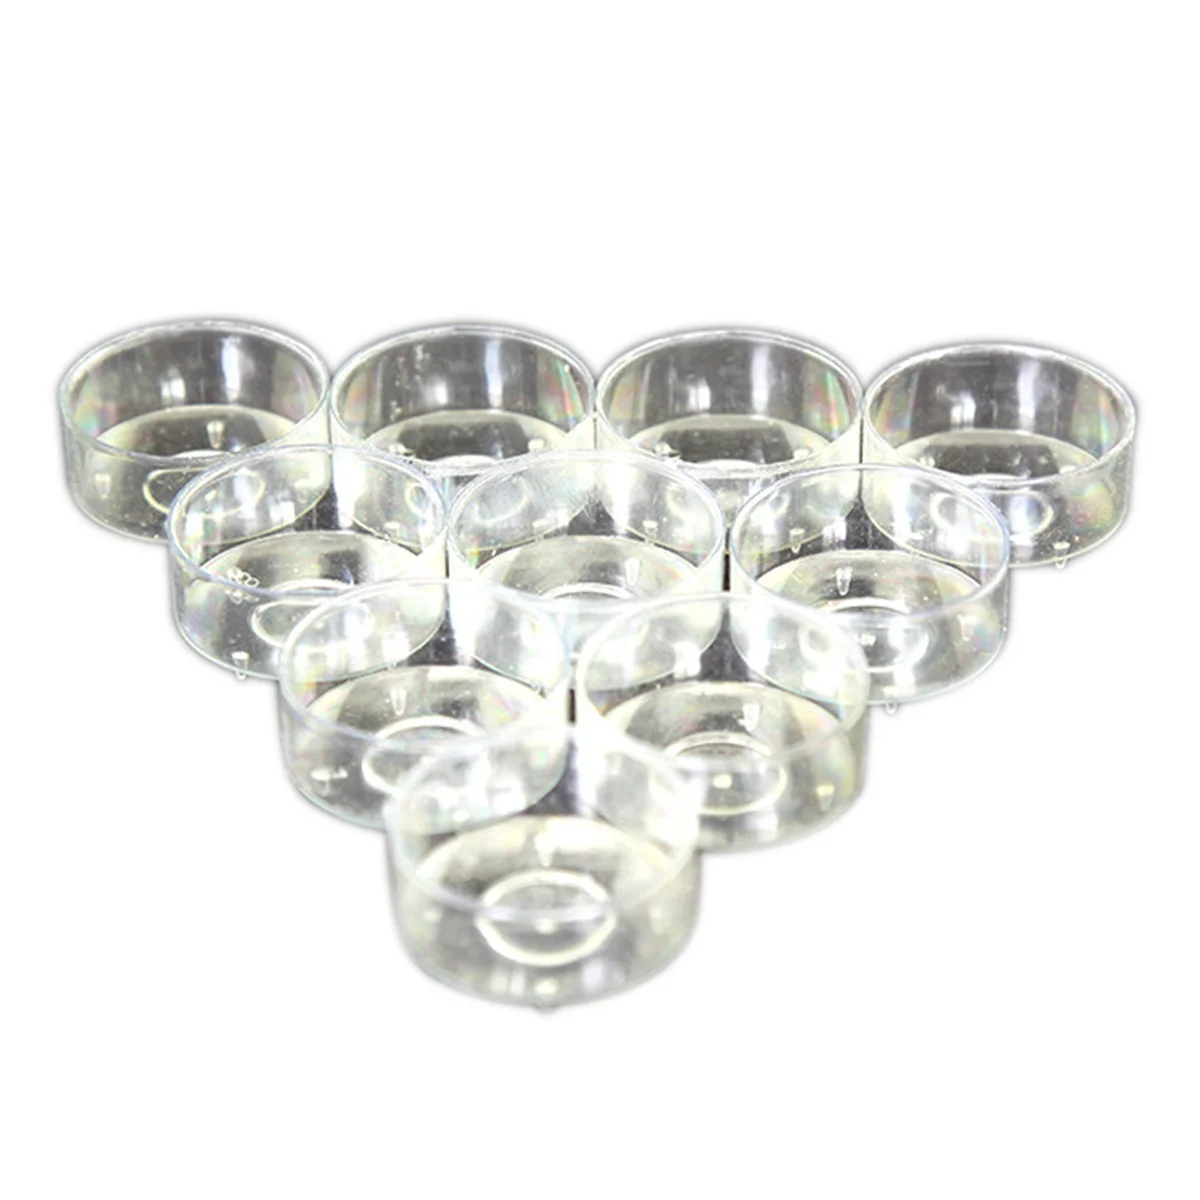 

Holder Plastic Cup Cups Holders Tealight Light Tea Clear Containers Votive Empty Wax Making Aromatherapy Melt Temple Wedding